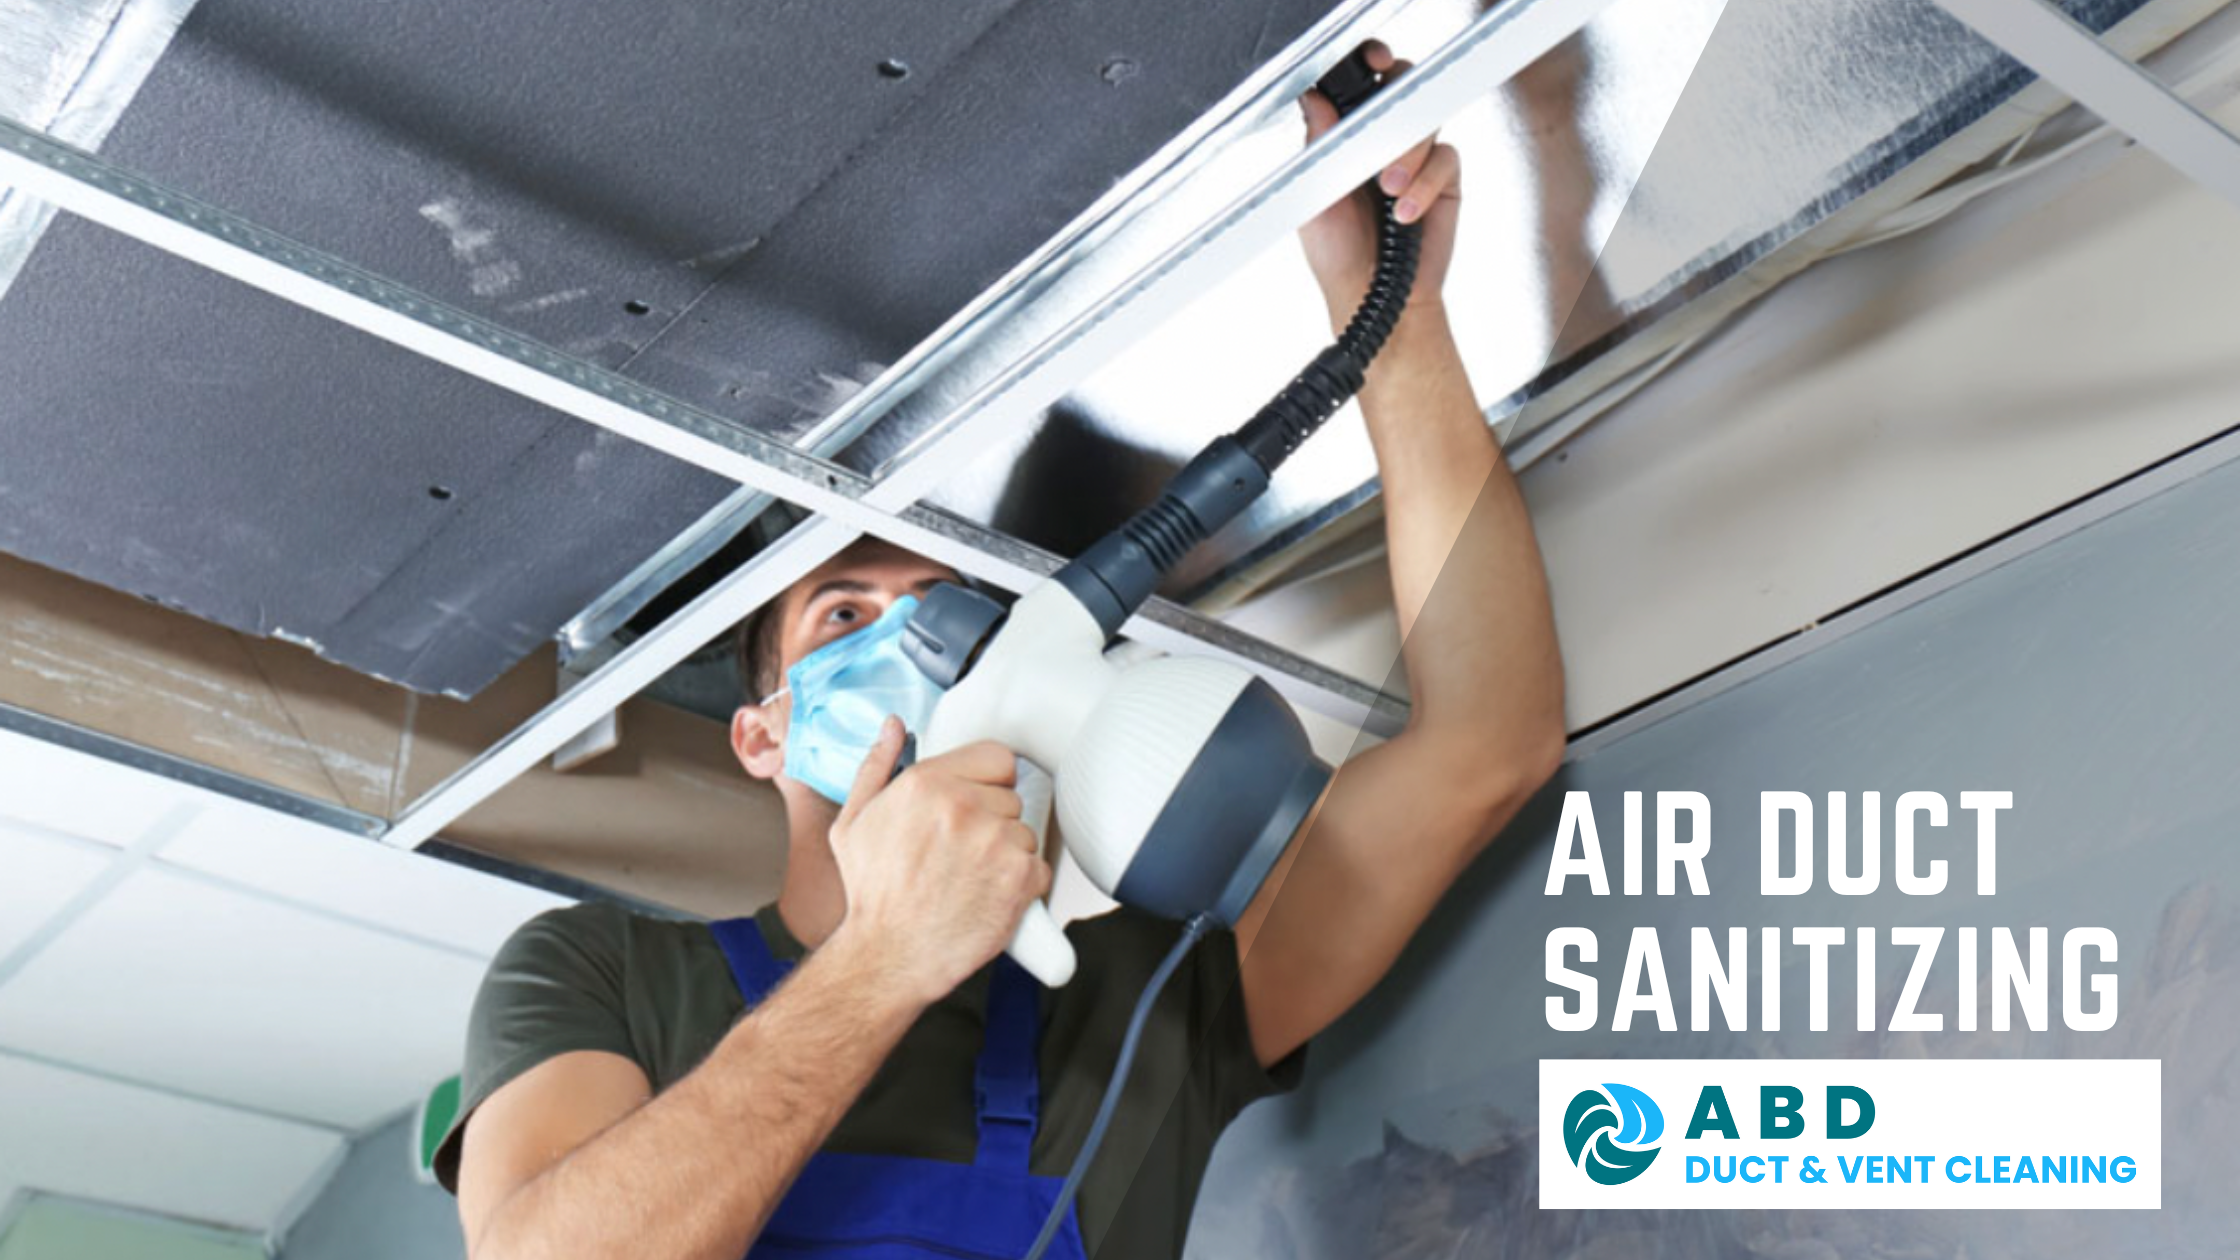 Air duct sanitizing process